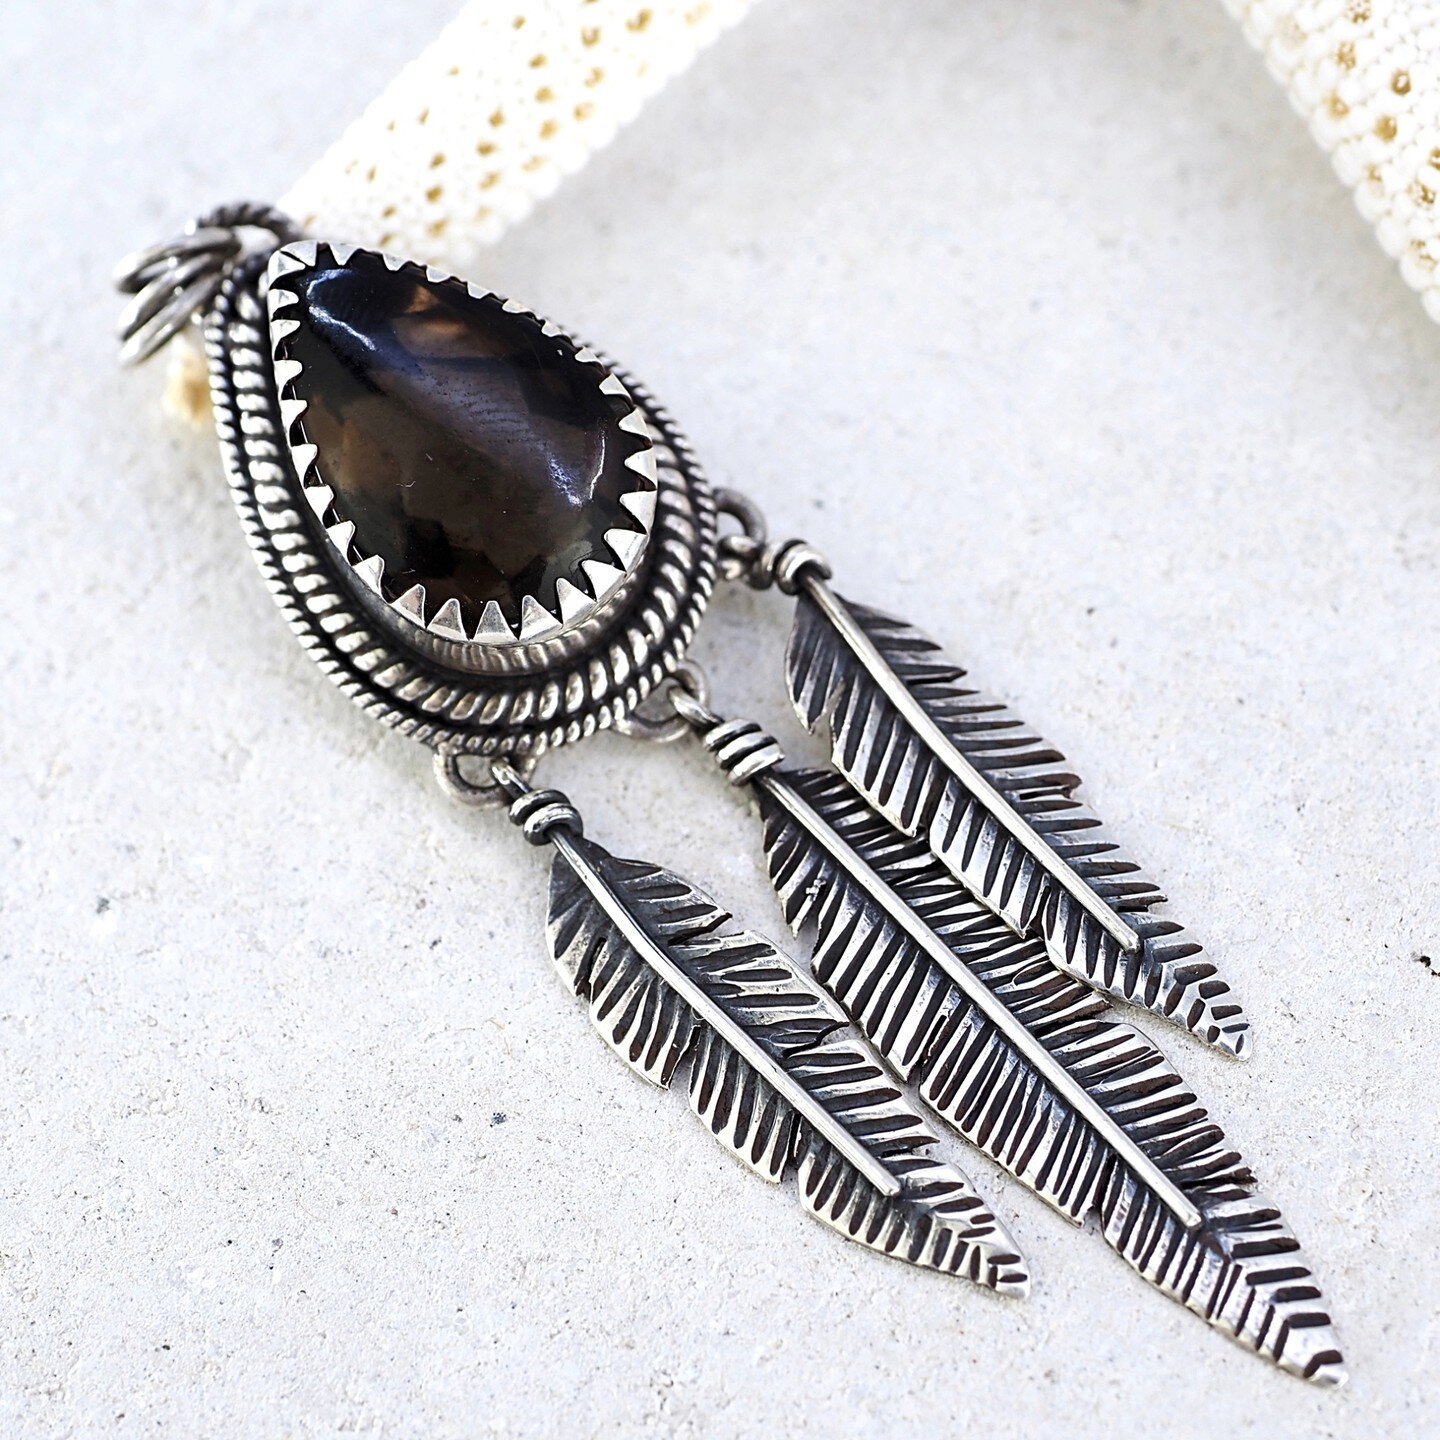 𝗙𝗲𝗲𝗹𝗶𝗻𝗴 𝗱𝗿𝗮𝘄𝗻 to smoky quartz lately?  Smoky quartz has a very grounding energy and is known to help one move on from difficult experiences and let go of the past.

In Celtic cultures, this beautiful stone is said to have been sacred, rep